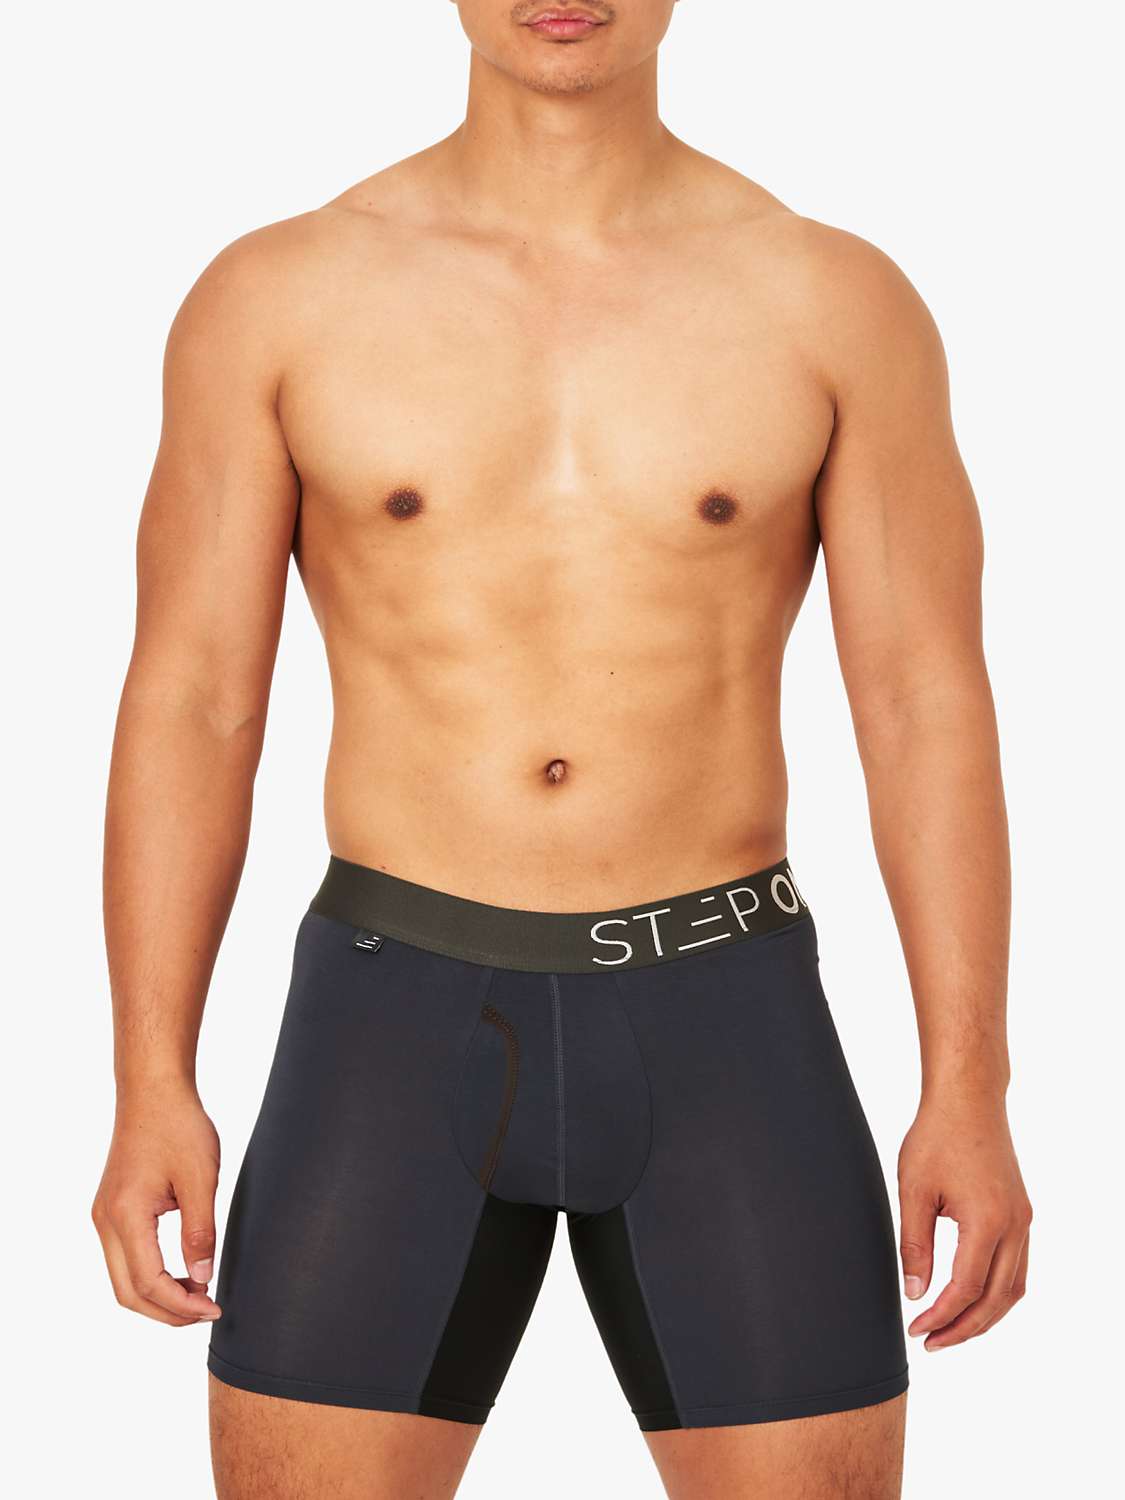 Buy Step One Bamboo Boxer Briefs With Fly, Pack of 5 Online at johnlewis.com